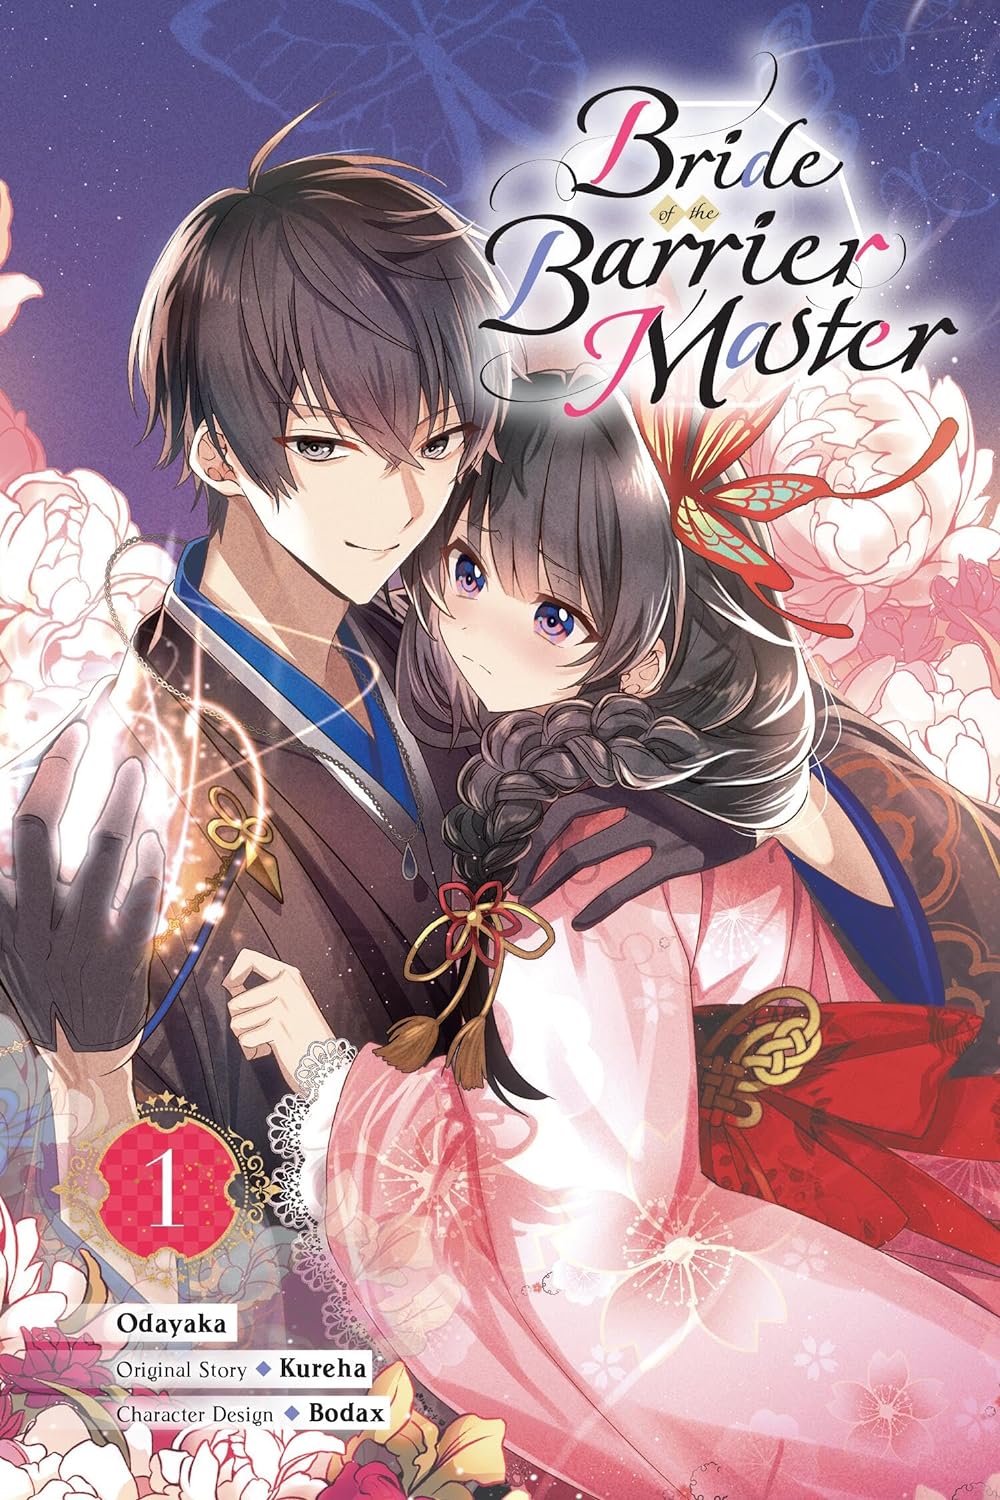 Bride of the Barrier Master (Manga) Vol. 01